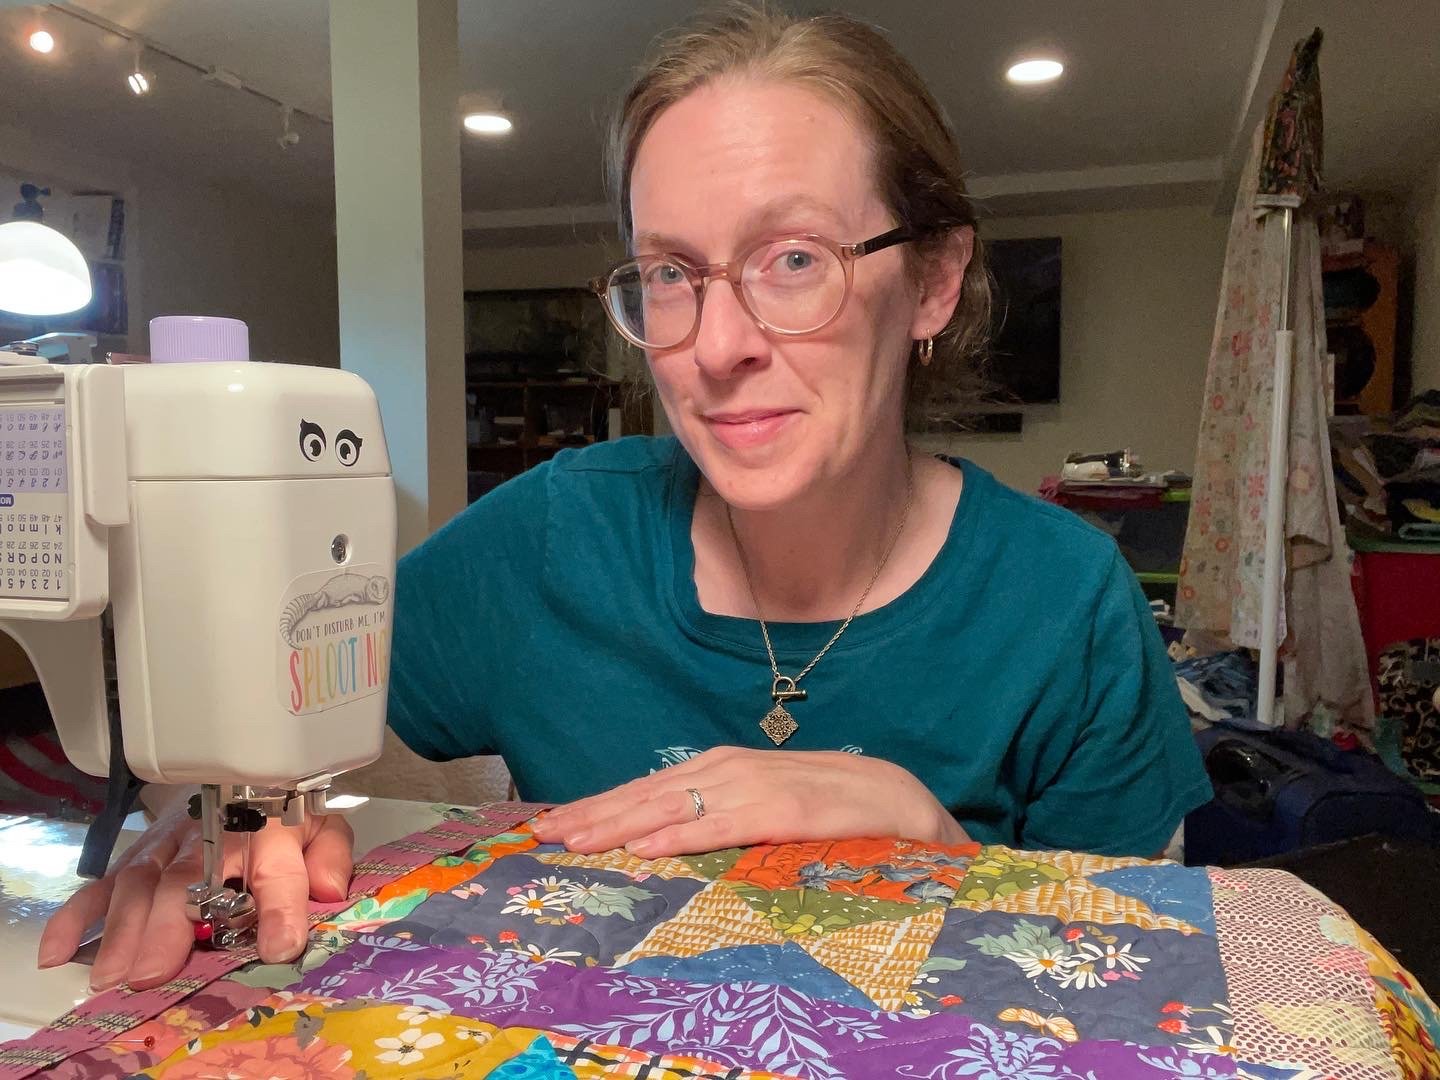 Alexandrakis is a former   teacher, but the coronavirus    pandemic prompted a career pivot, and her focus now is on teaching people to sew and quilt.